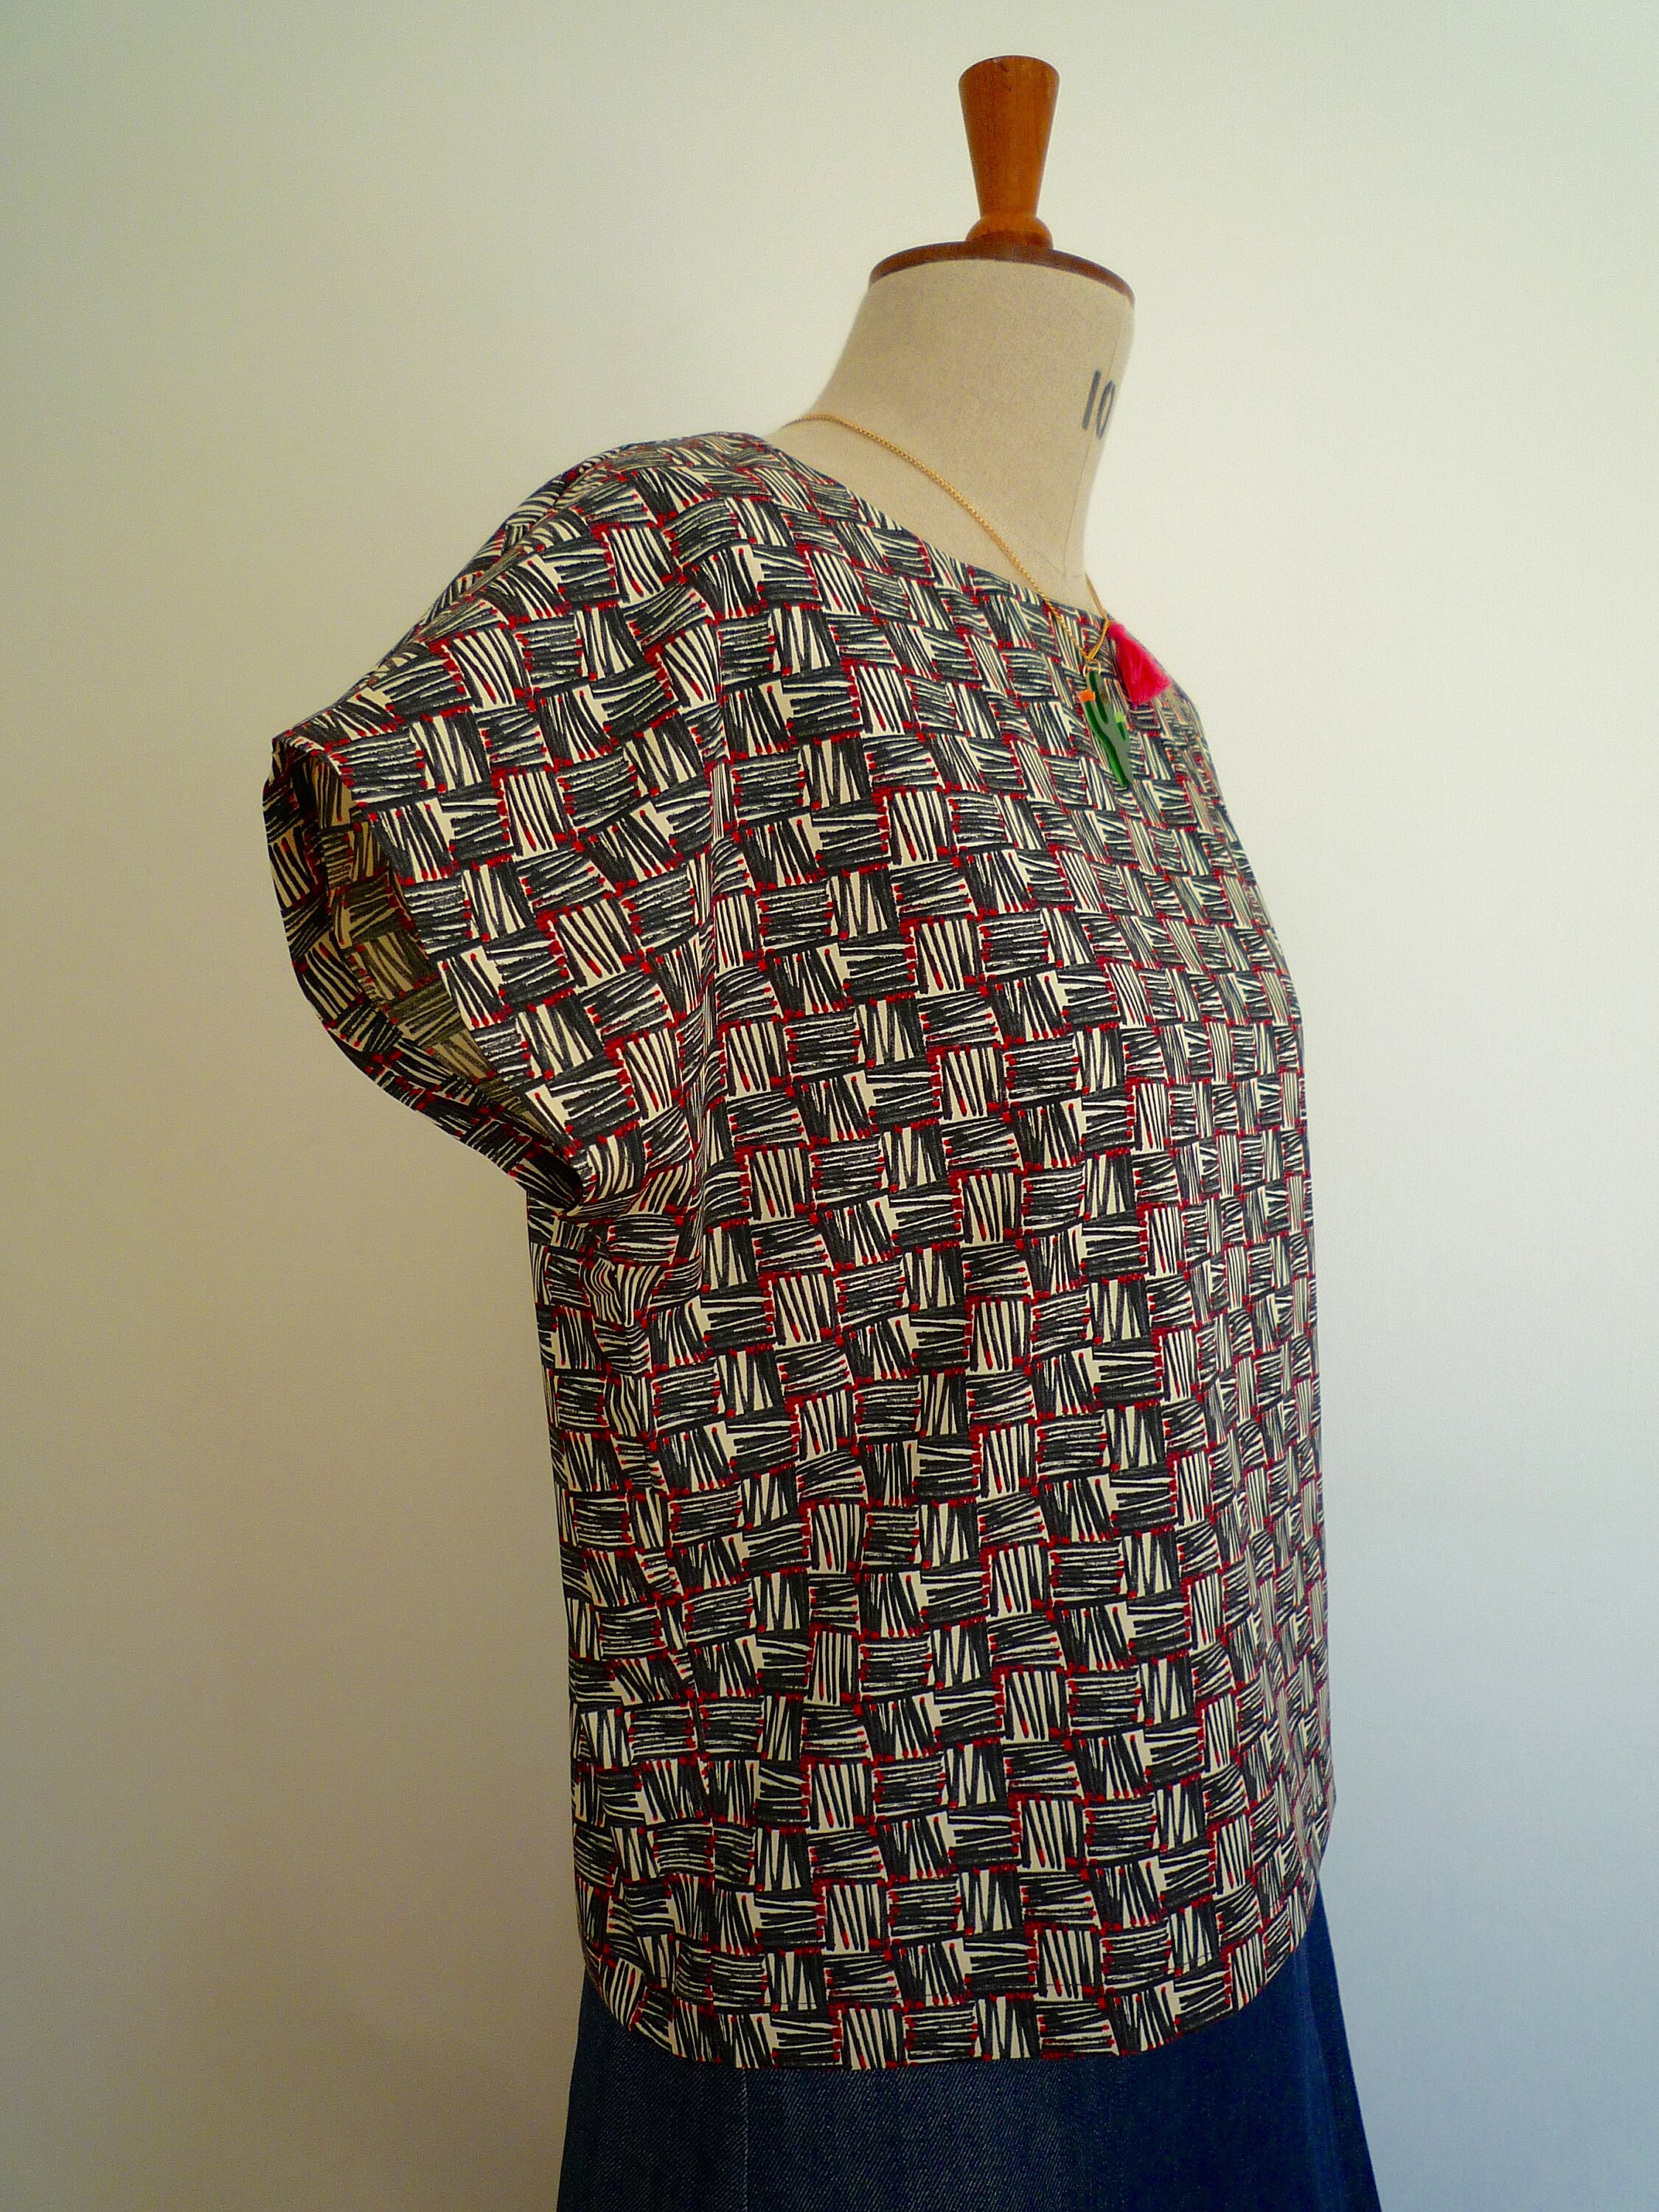 Vintage Inspired Black and Red Liberty Print Cotton Boxy Top - Etsy UK